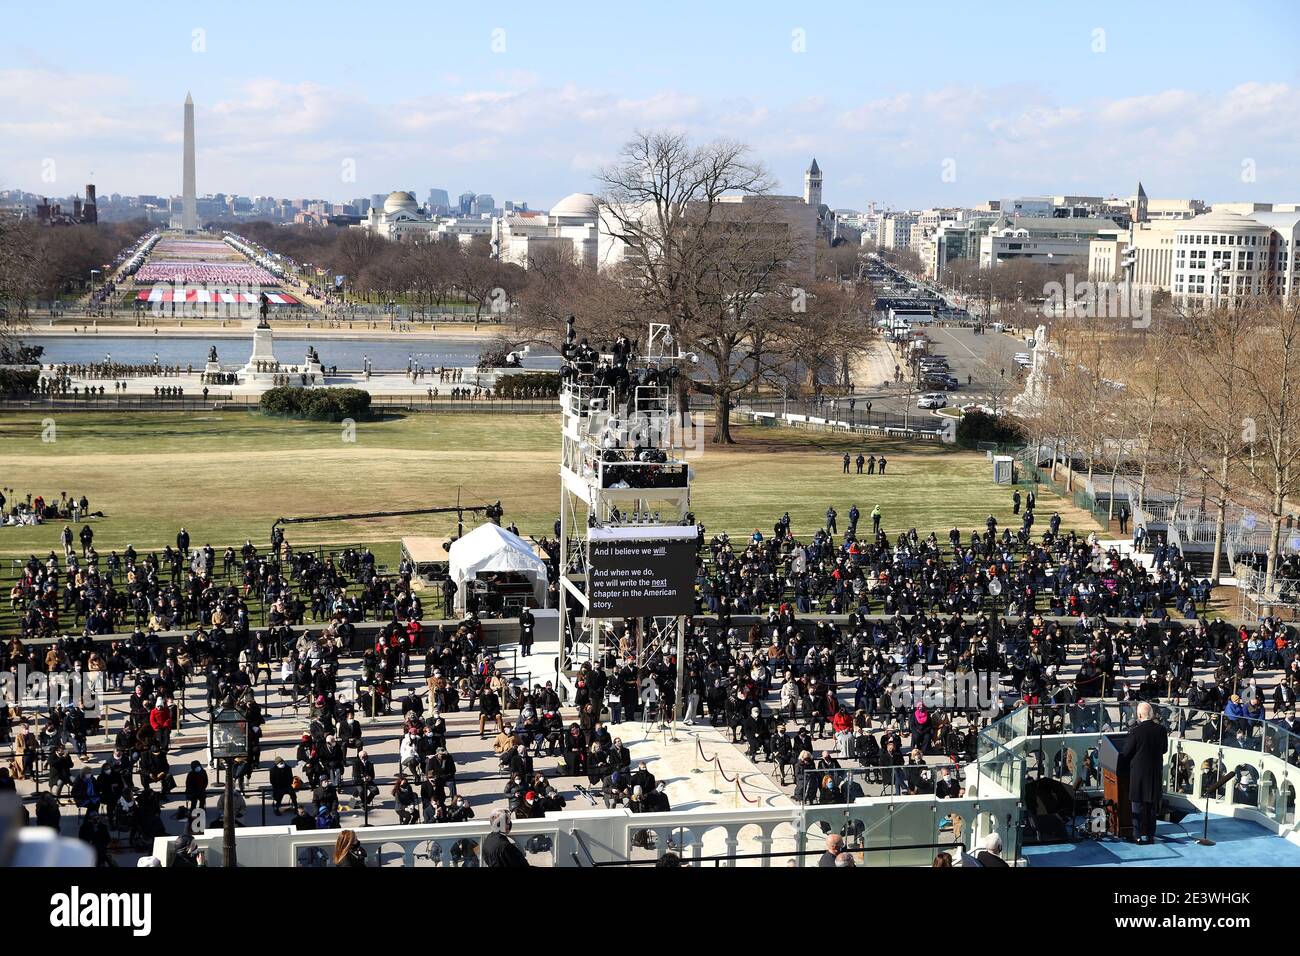 Washington, DC, USA. 20th Jan, 2021. U.S. President Joe Biden delivers his inaugural address on the West Front of the U.S. Capitol on January 20, 2021 in Washington, DC. During today's inauguration ceremony Joe Biden becomes the 46th president of the United States. ( Credit: Tasos Katopodis/Getty Images)/Media Punch/Alamy Live News Stock Photo